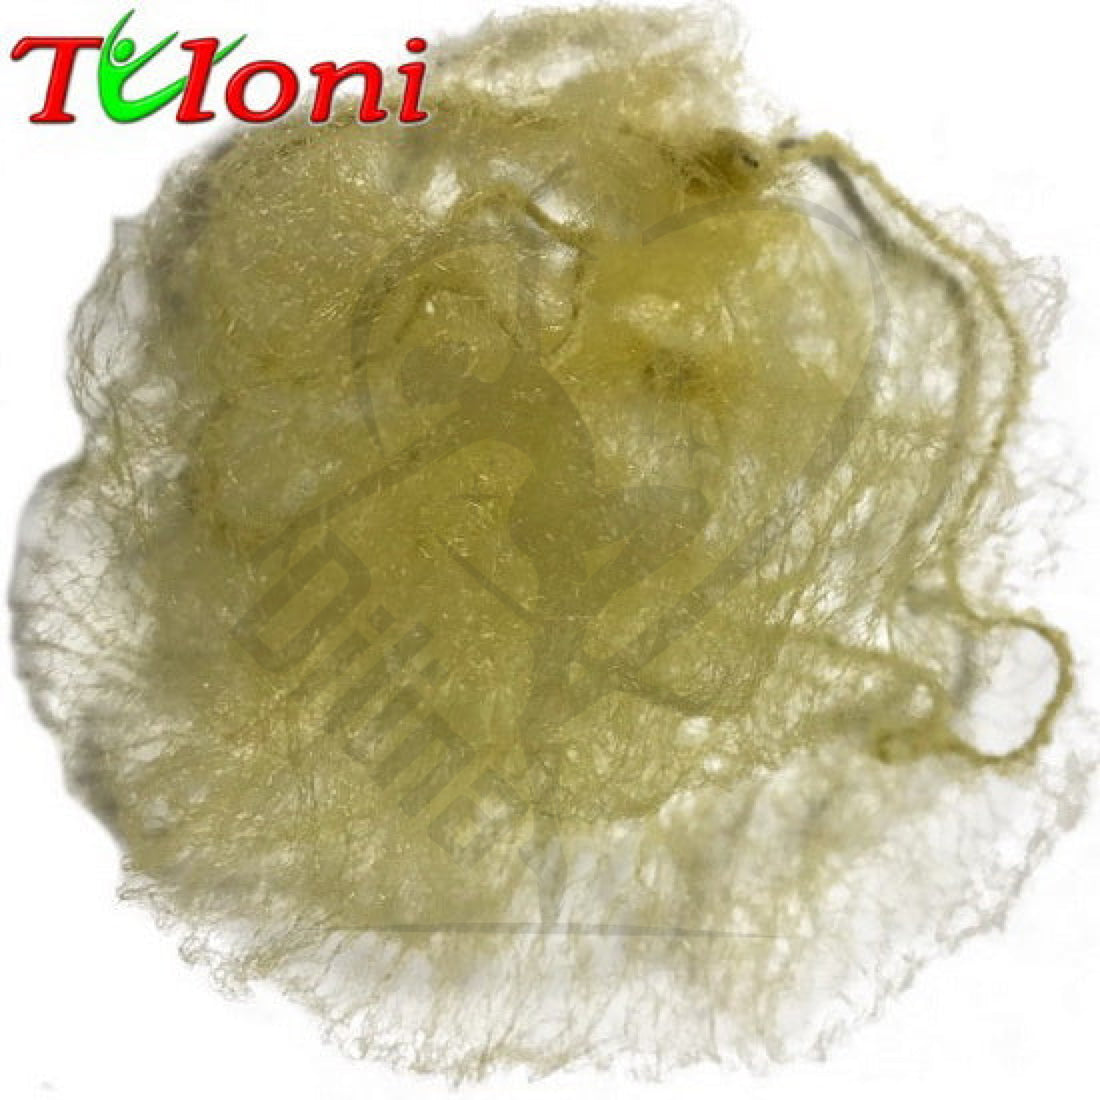 Tuloni Invisible Blonde Hairnets Accessories